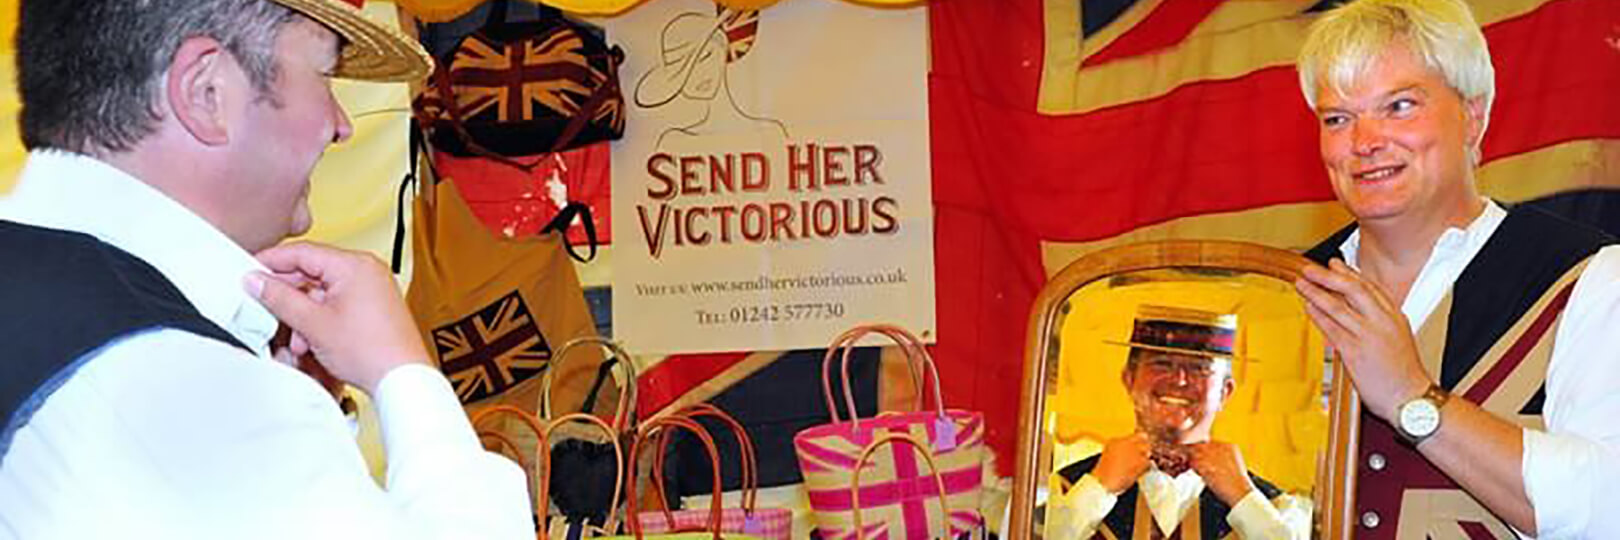 Send Her Victorious Stall